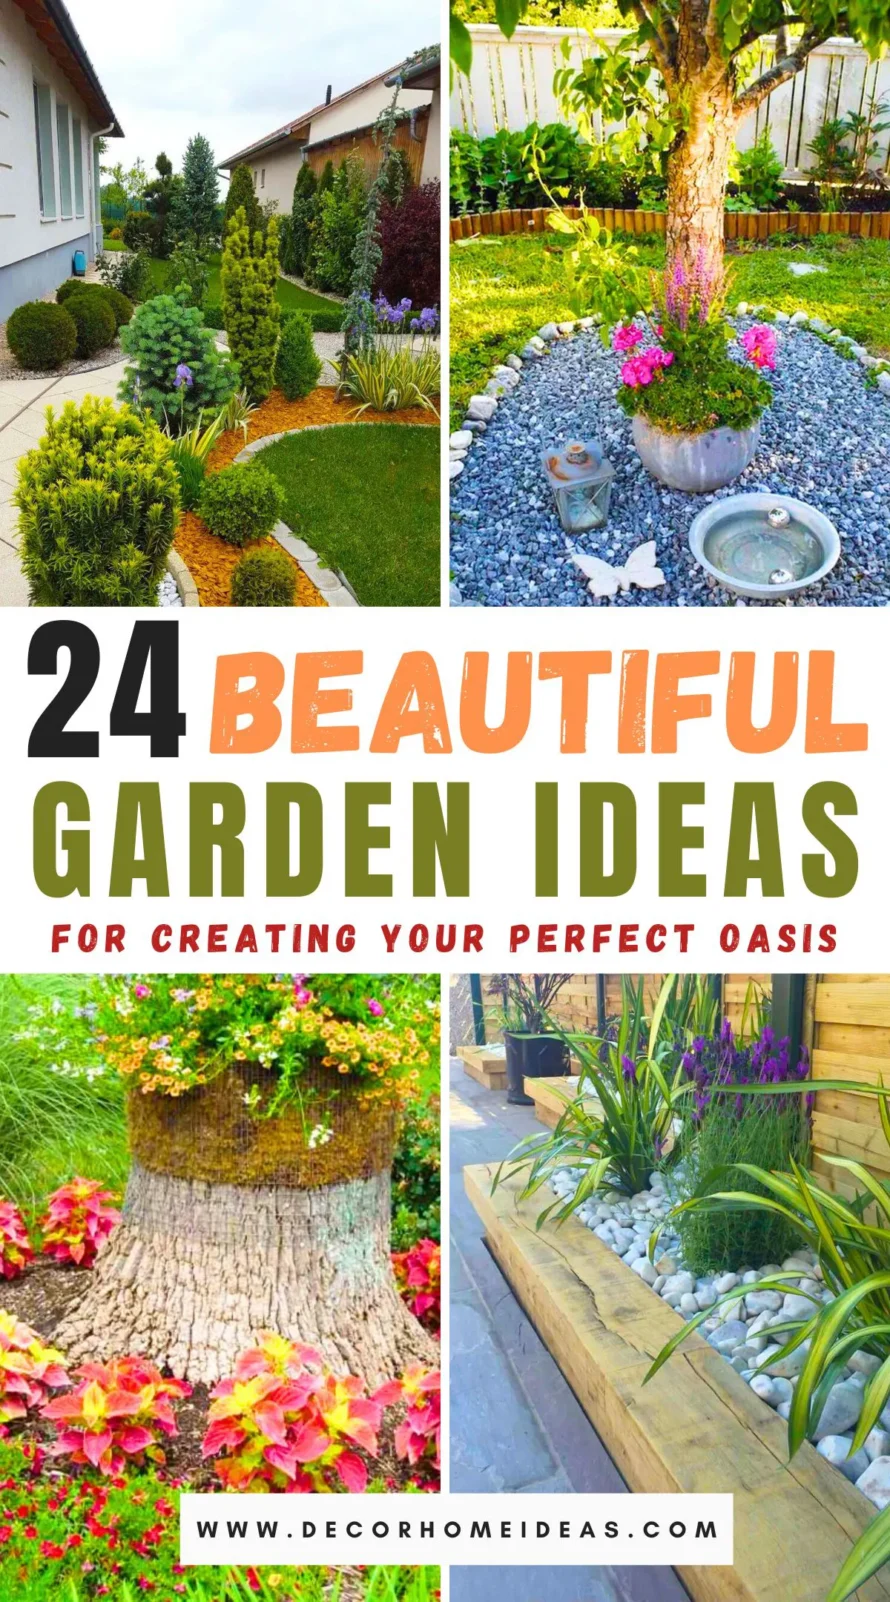 Discover 24 dazzling garden concepts to transform your outdoor space into a breathtaking oasis. From lush greenery and vibrant floral arrangements to cozy seating areas and tranquil water features, these ideas inspire relaxation and rejuvenation while enhancing the natural beauty of your surroundings.